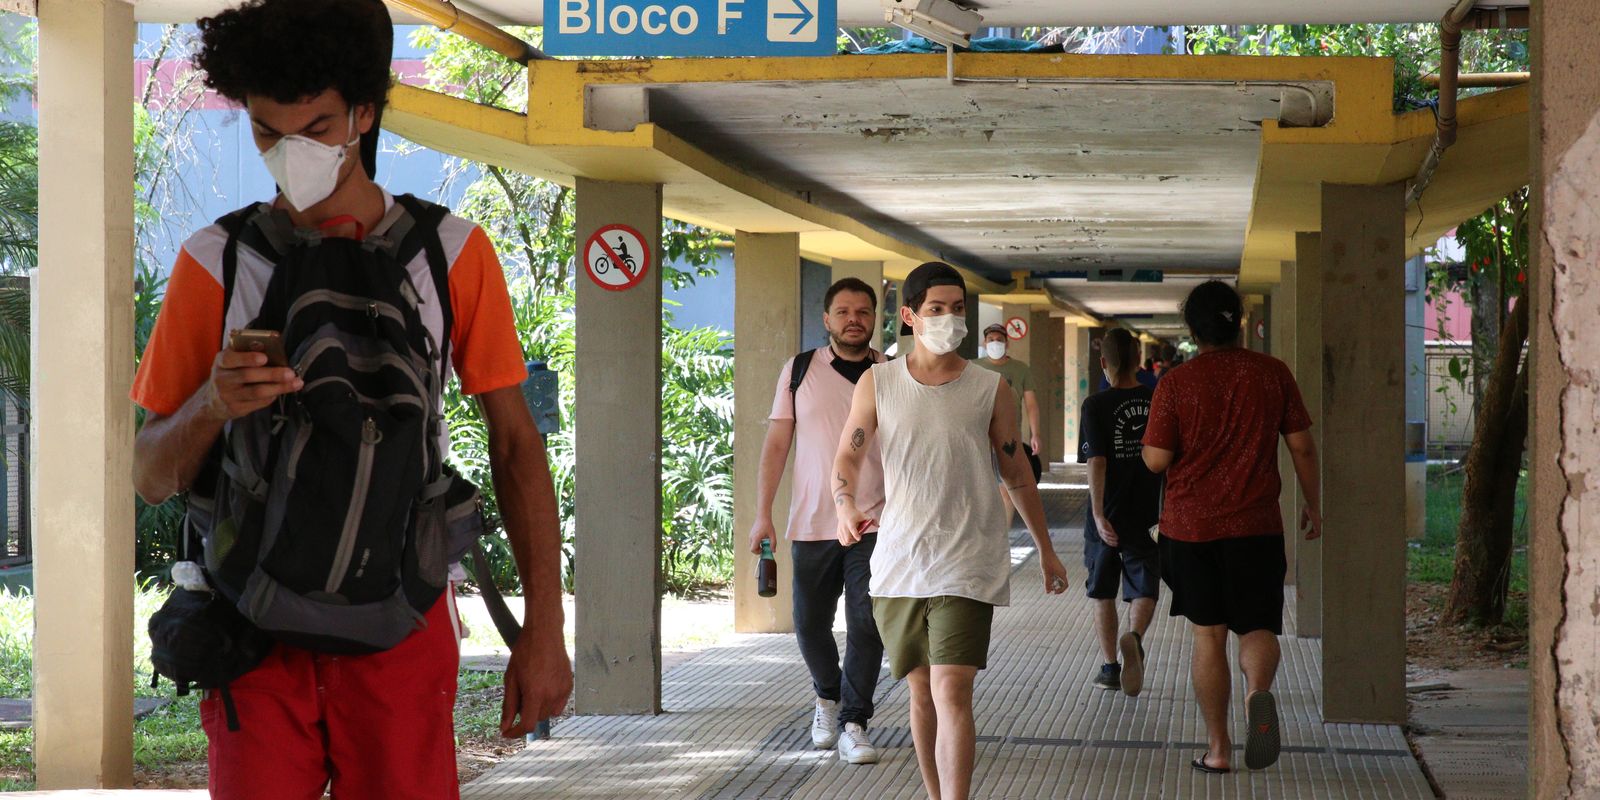 Protective mask will be mandatory in USP entrance exams
– News X